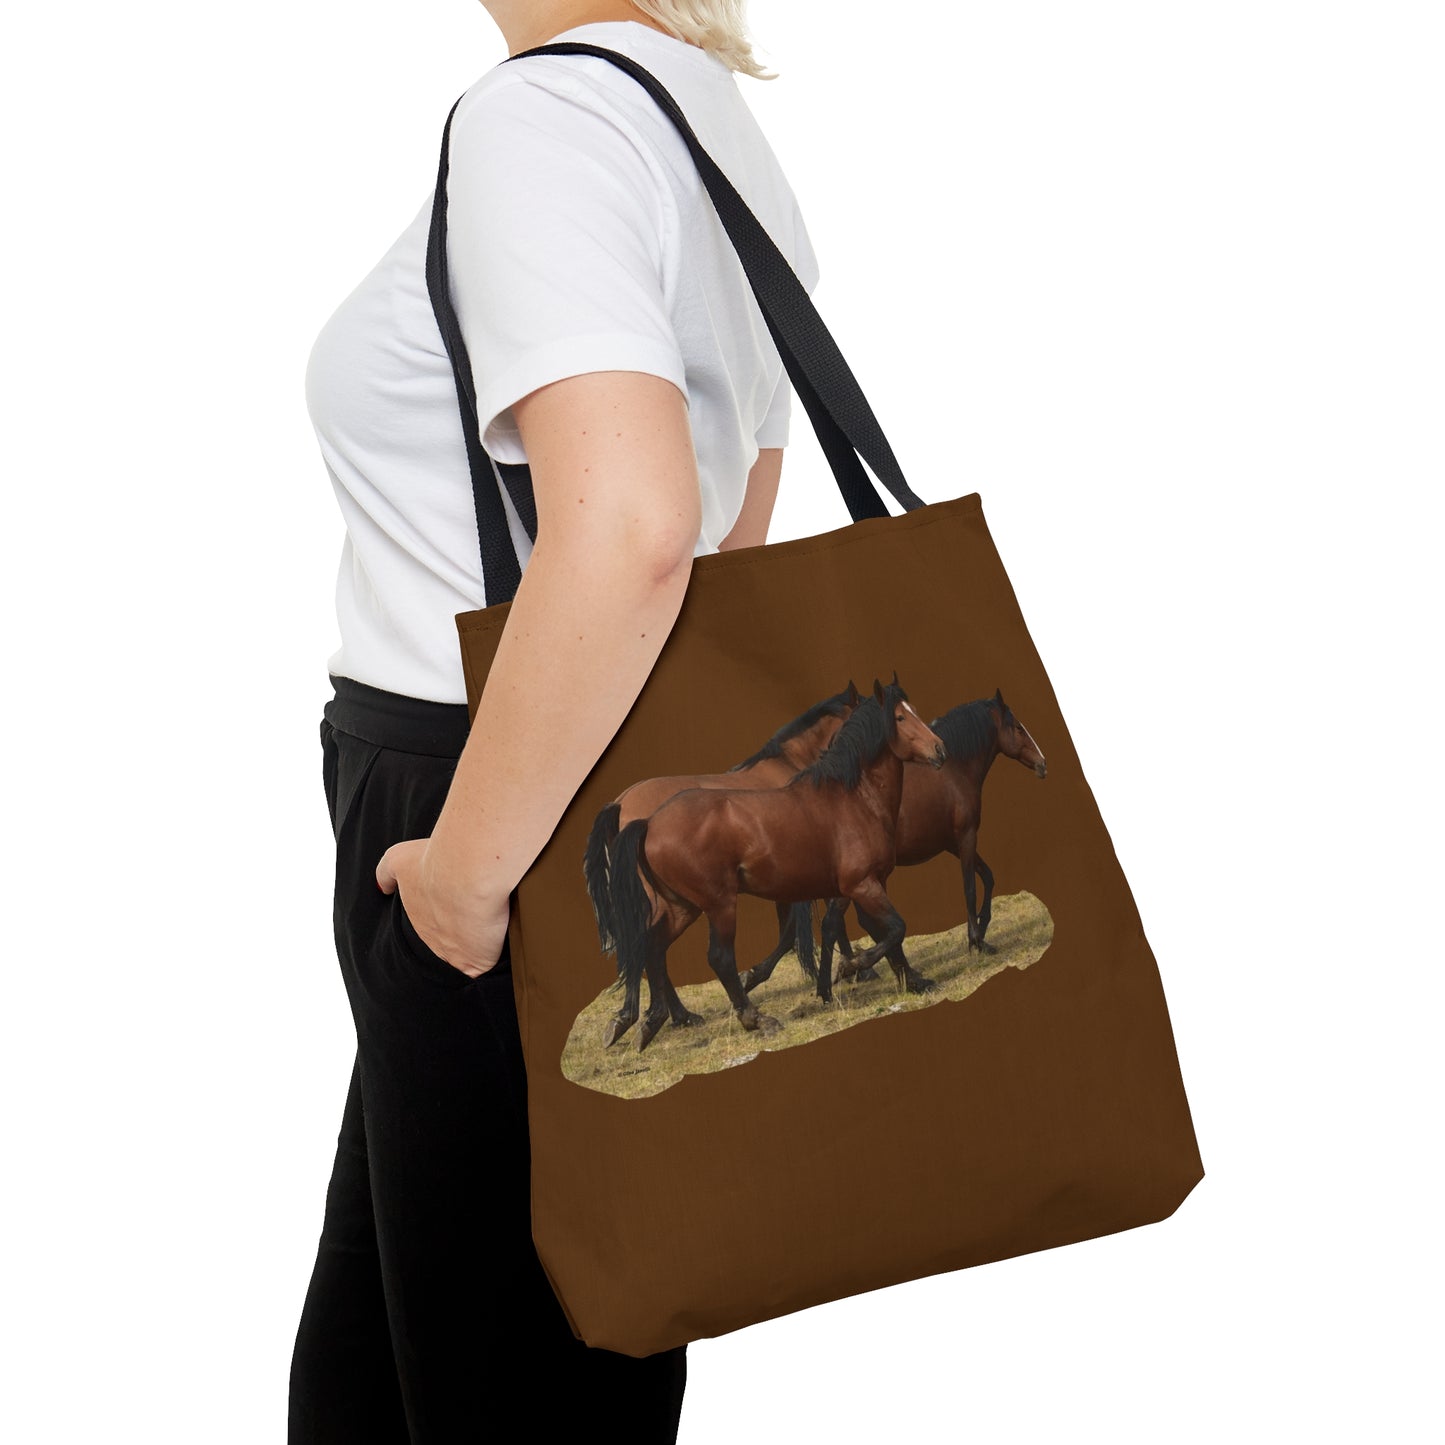 The Wild Bunch. Young Stallion and Mares.   Tote Bag (AOP)